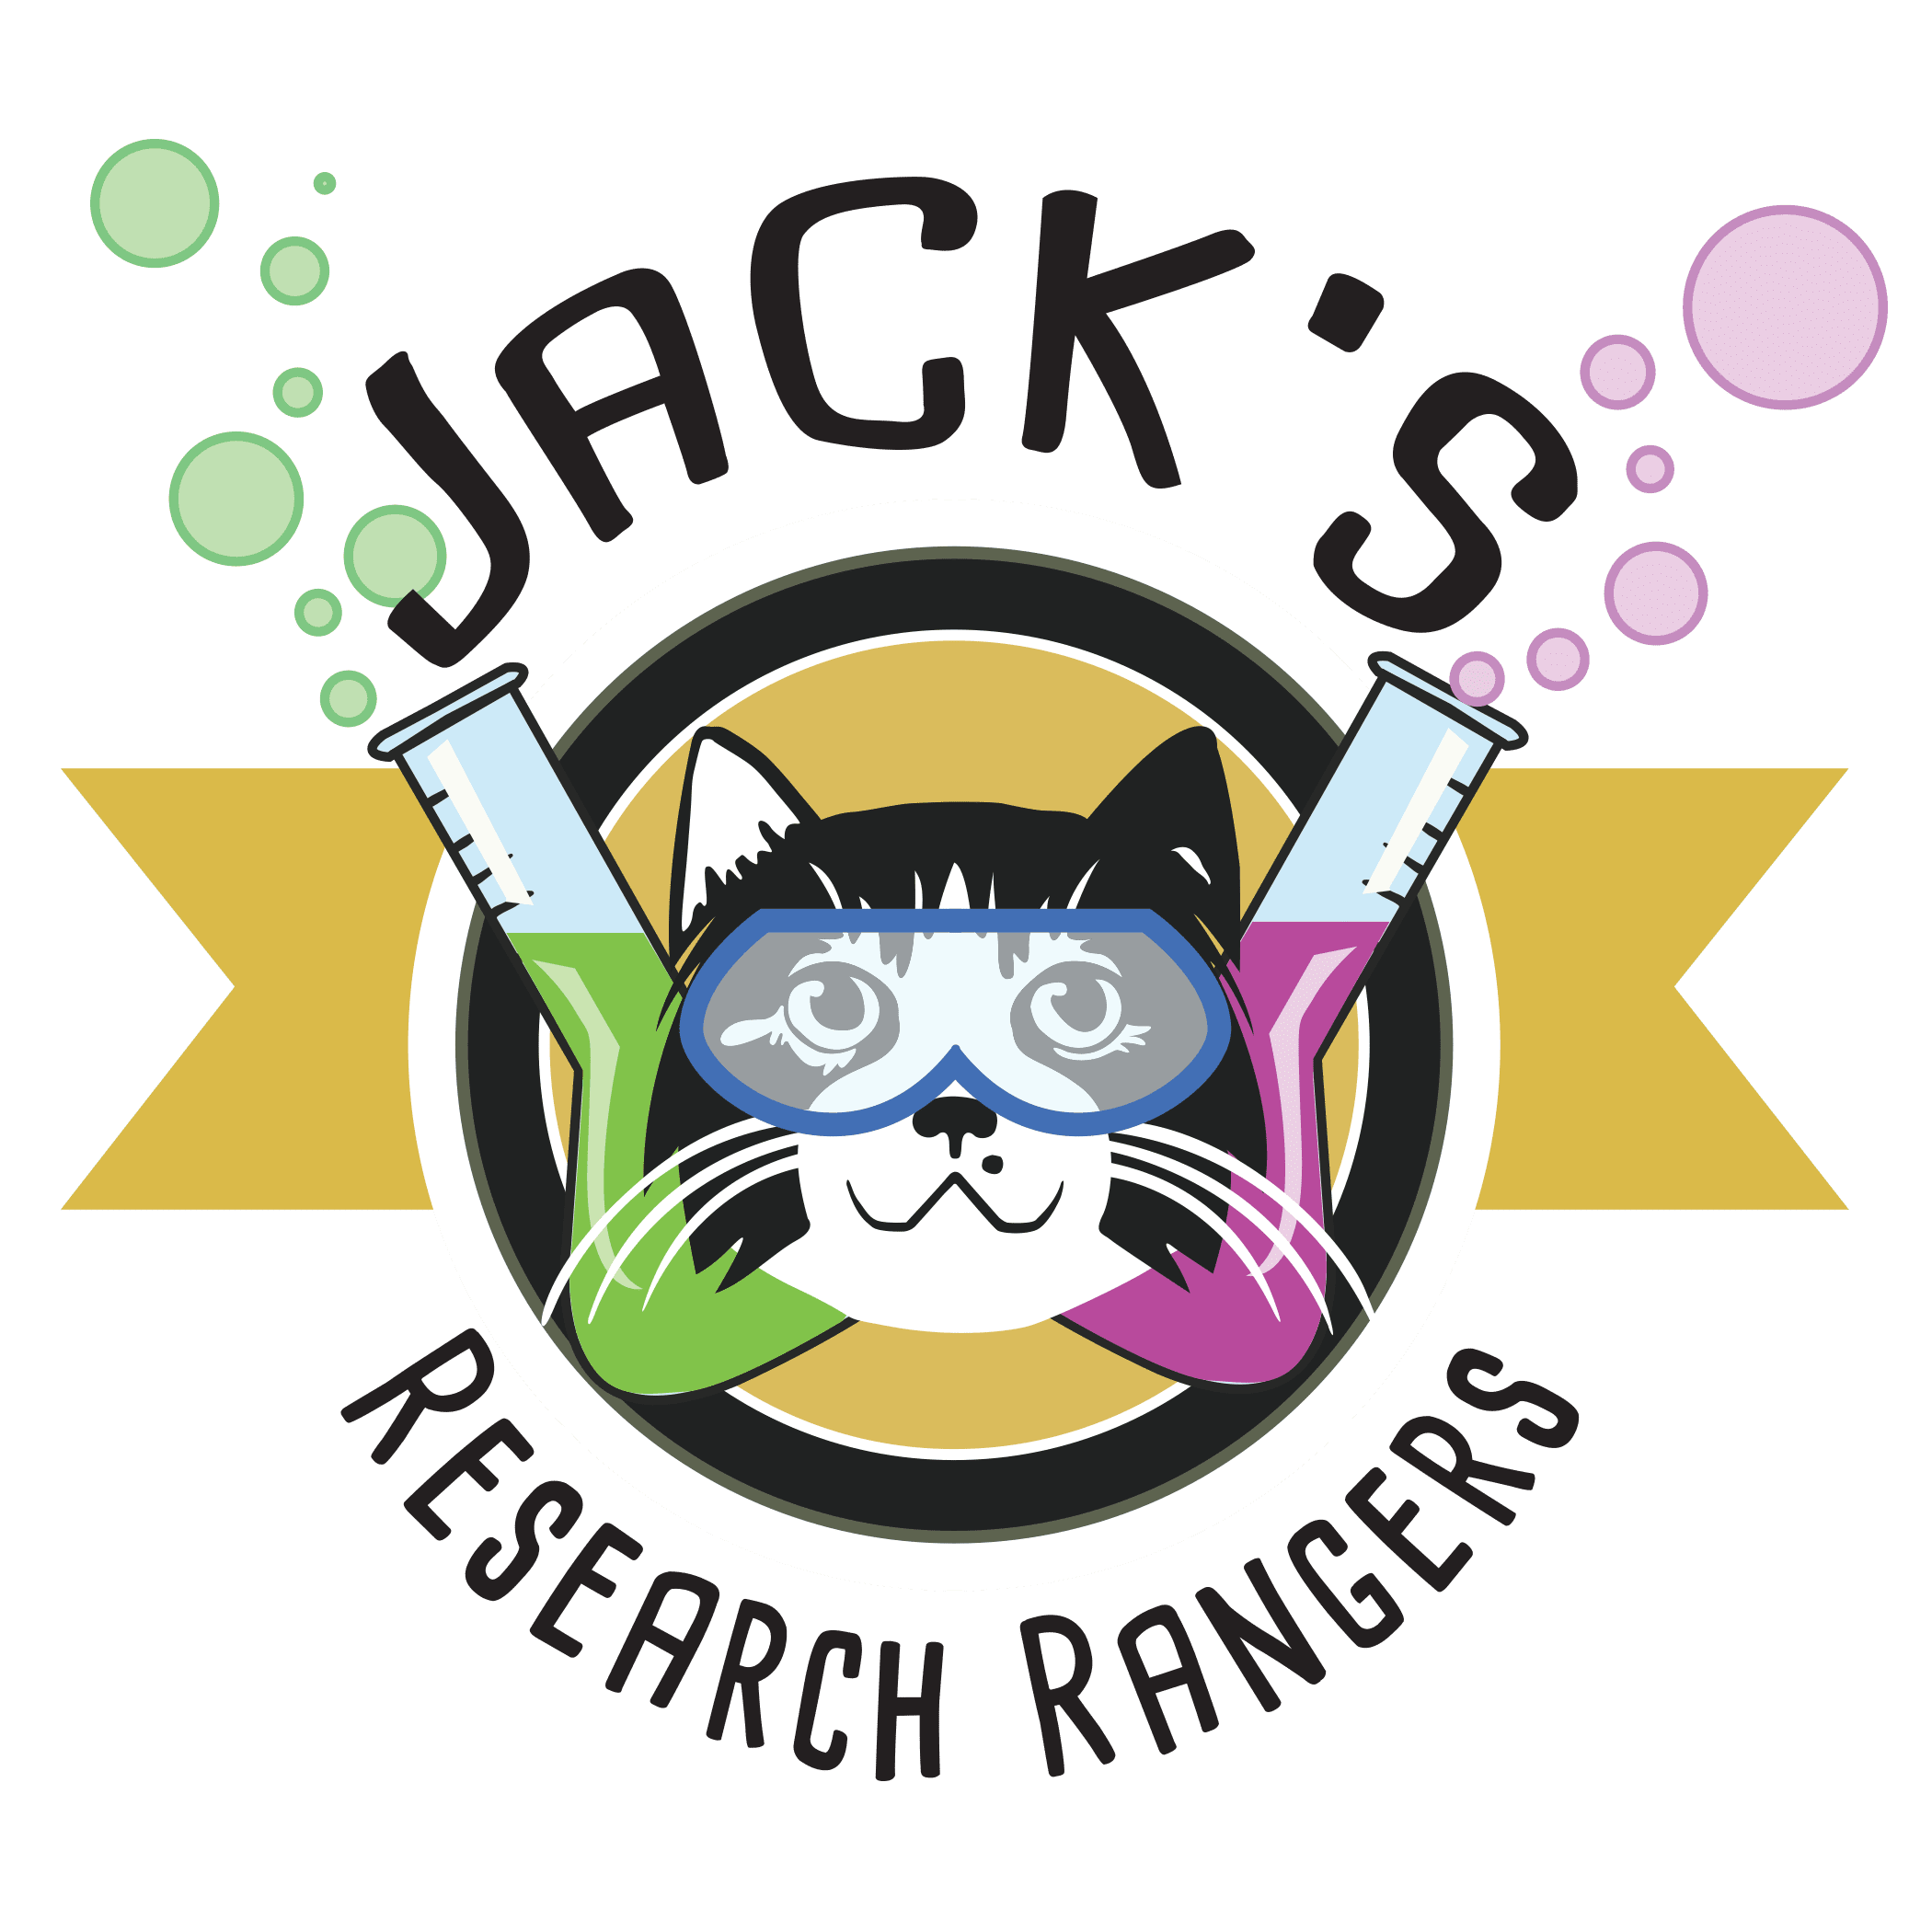 You are currently viewing Jack’s Research Rangers: Episode 2 | Deer Ridge Farms